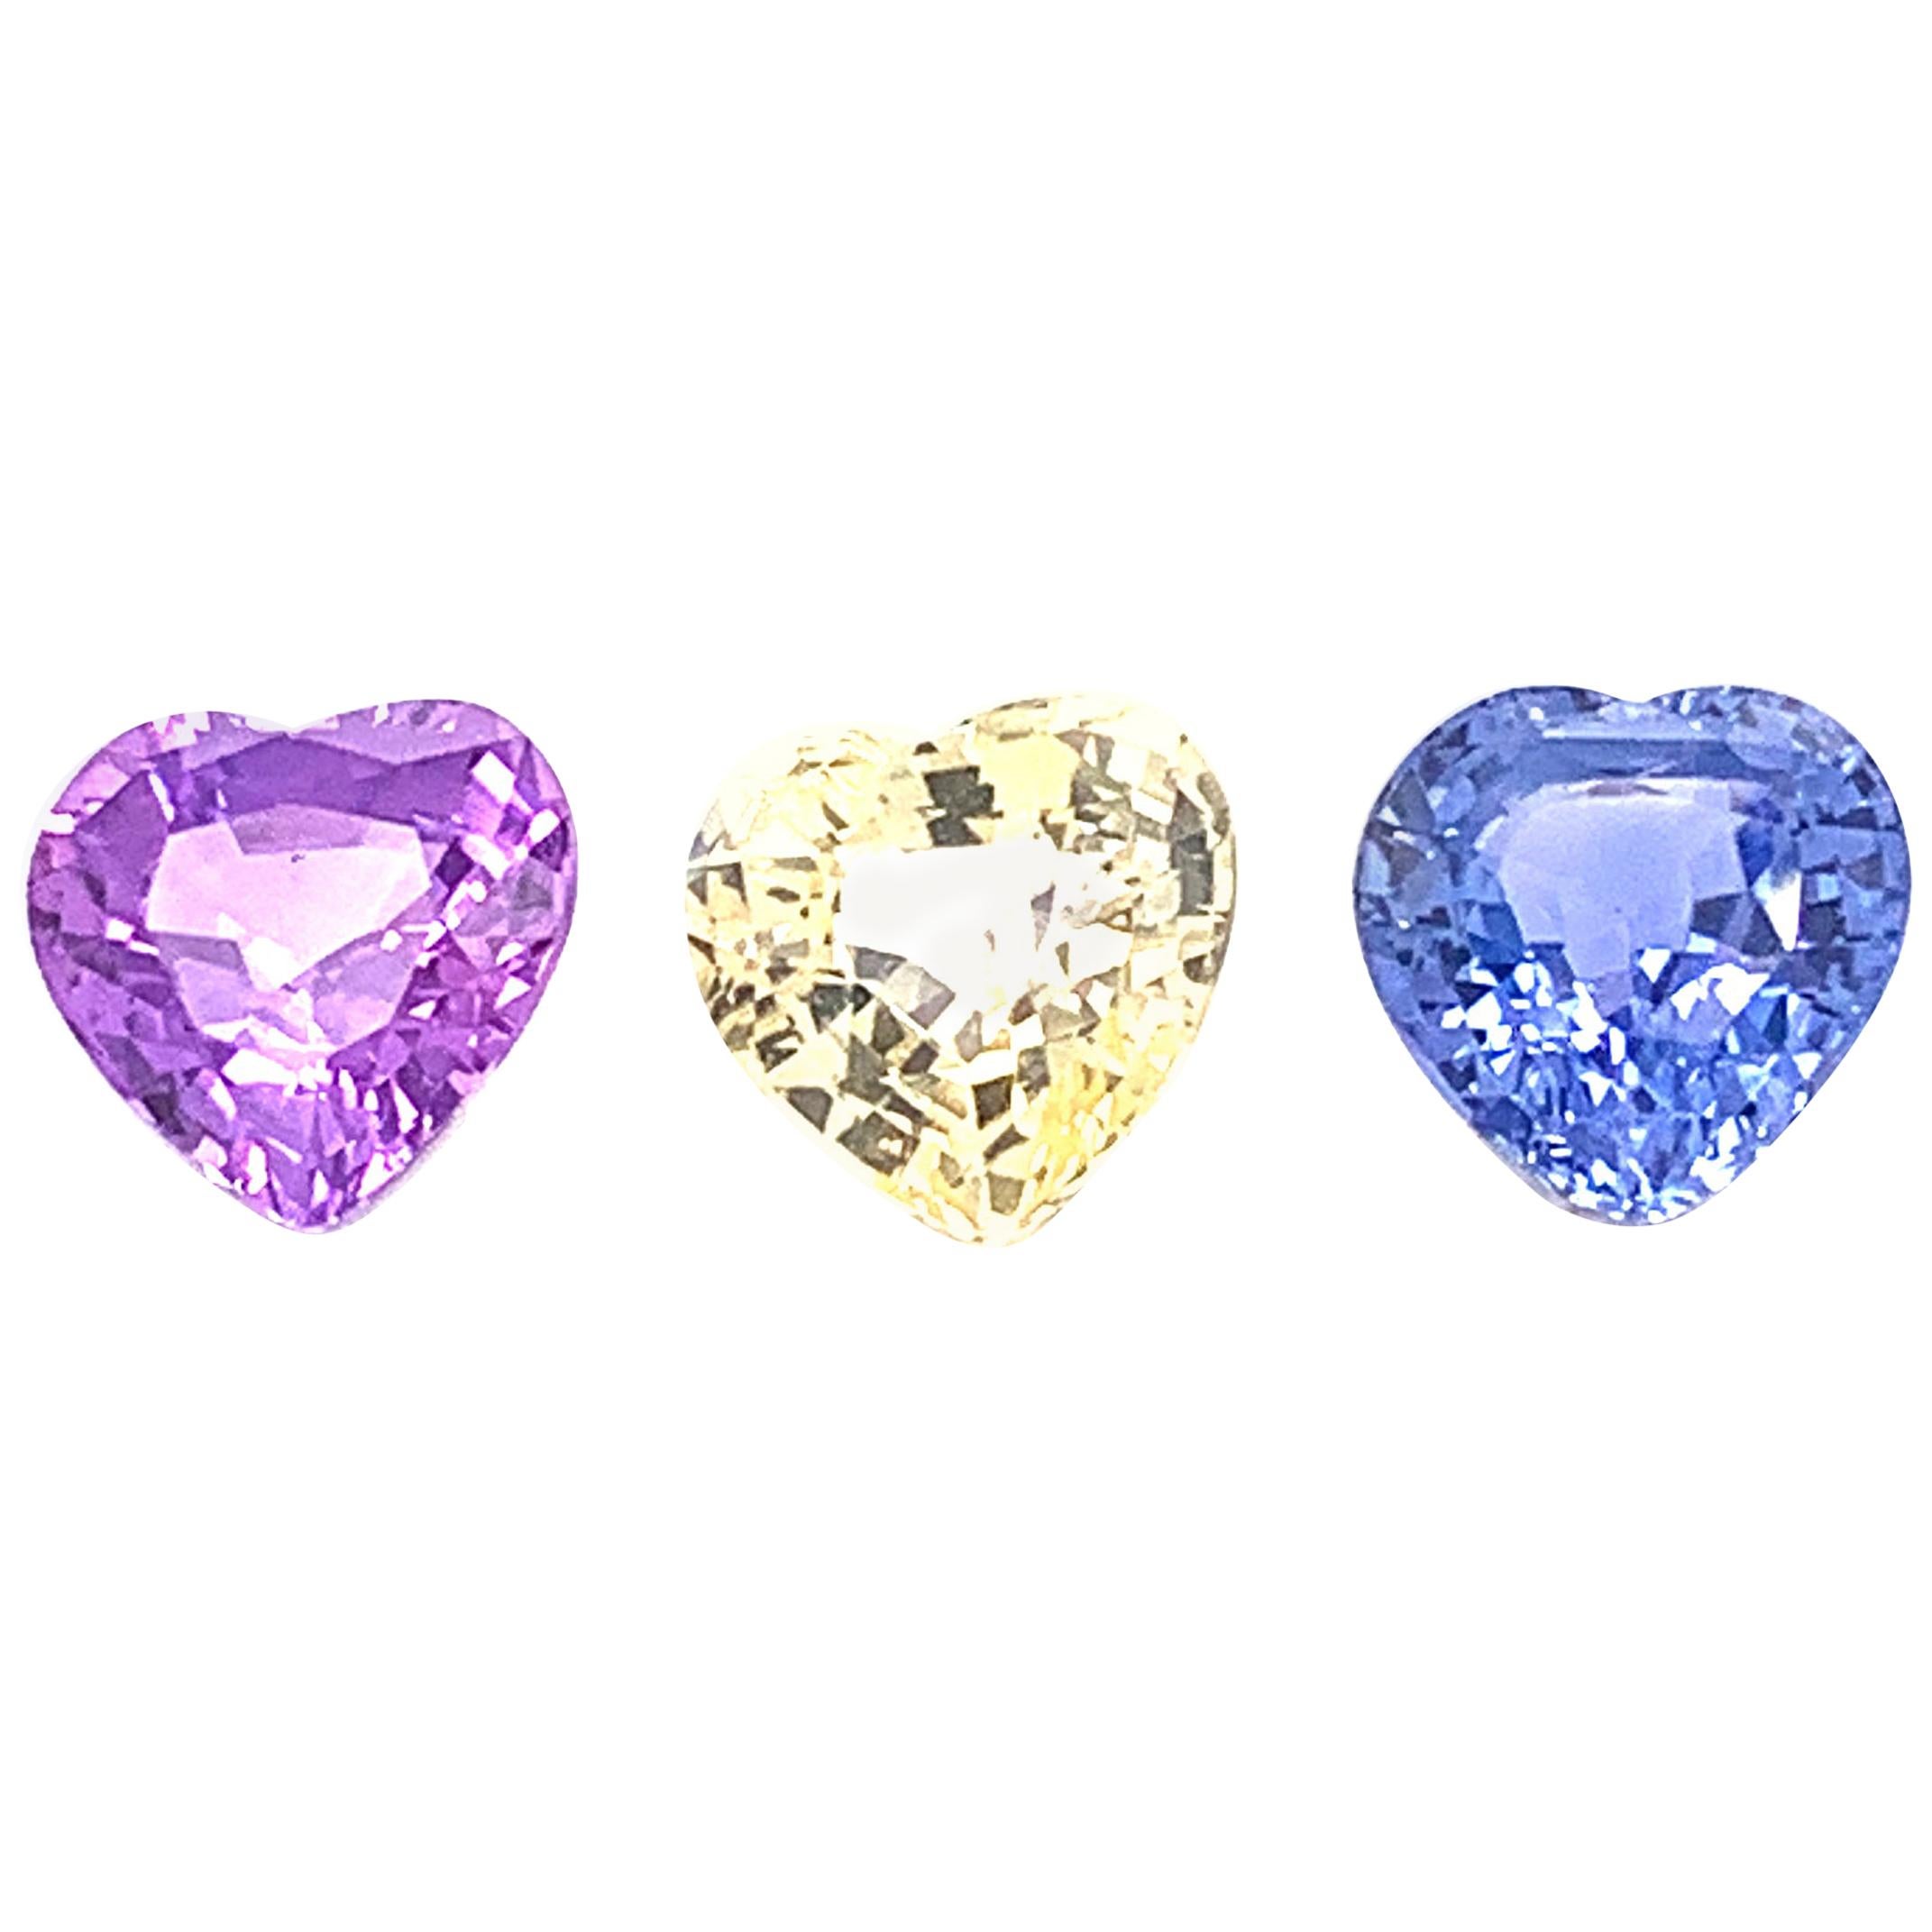 7.22 Carat Heart-Shaped Unheated Blue, Pink, and Yellow Sapphire Trio